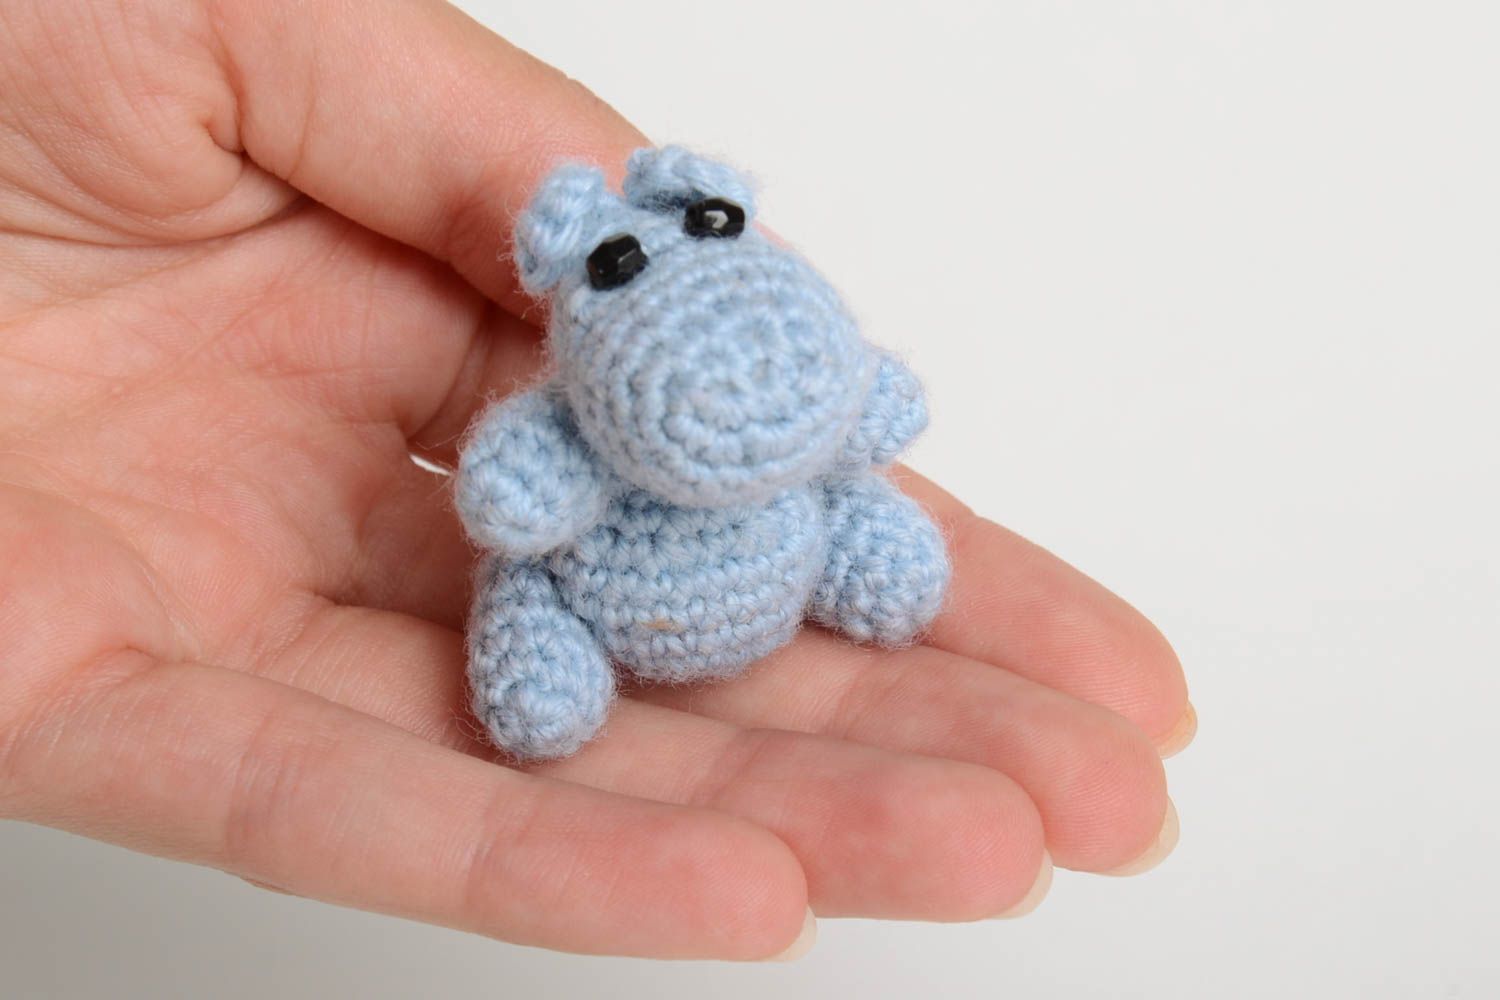 Handmade toy designer toy crocheted toy animal toy gift for baby decor ideas photo 5